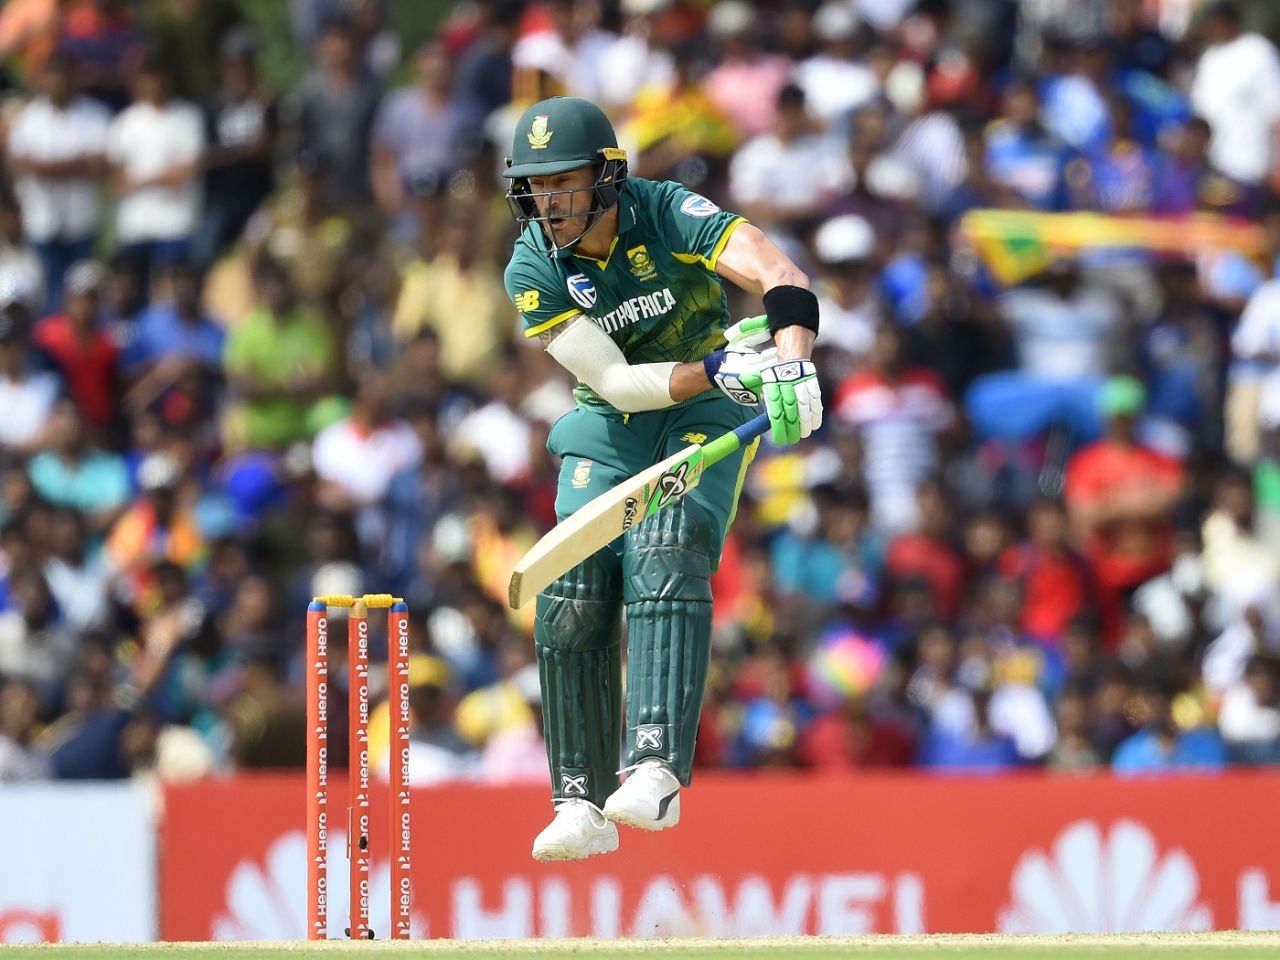 Faf du Plessis jumps to deal with the bounce , Sri Lanka v South Africa, 1st ODI, Dambulla, July 29, 2018